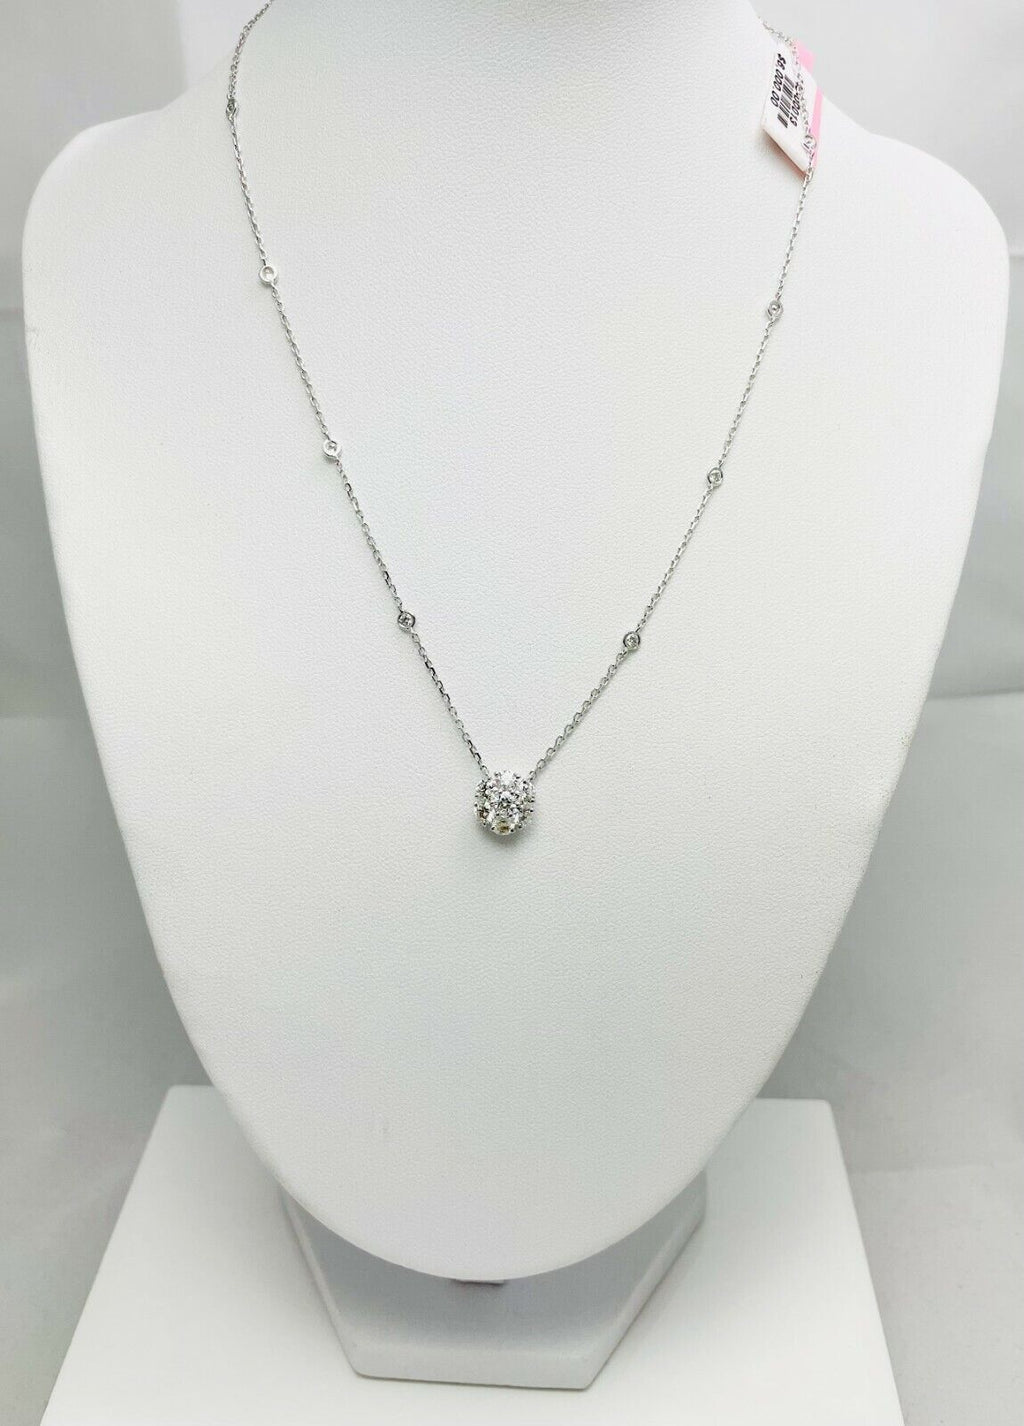 New! 1.39ctw Natural Diamond 14k White Gold Station Necklace